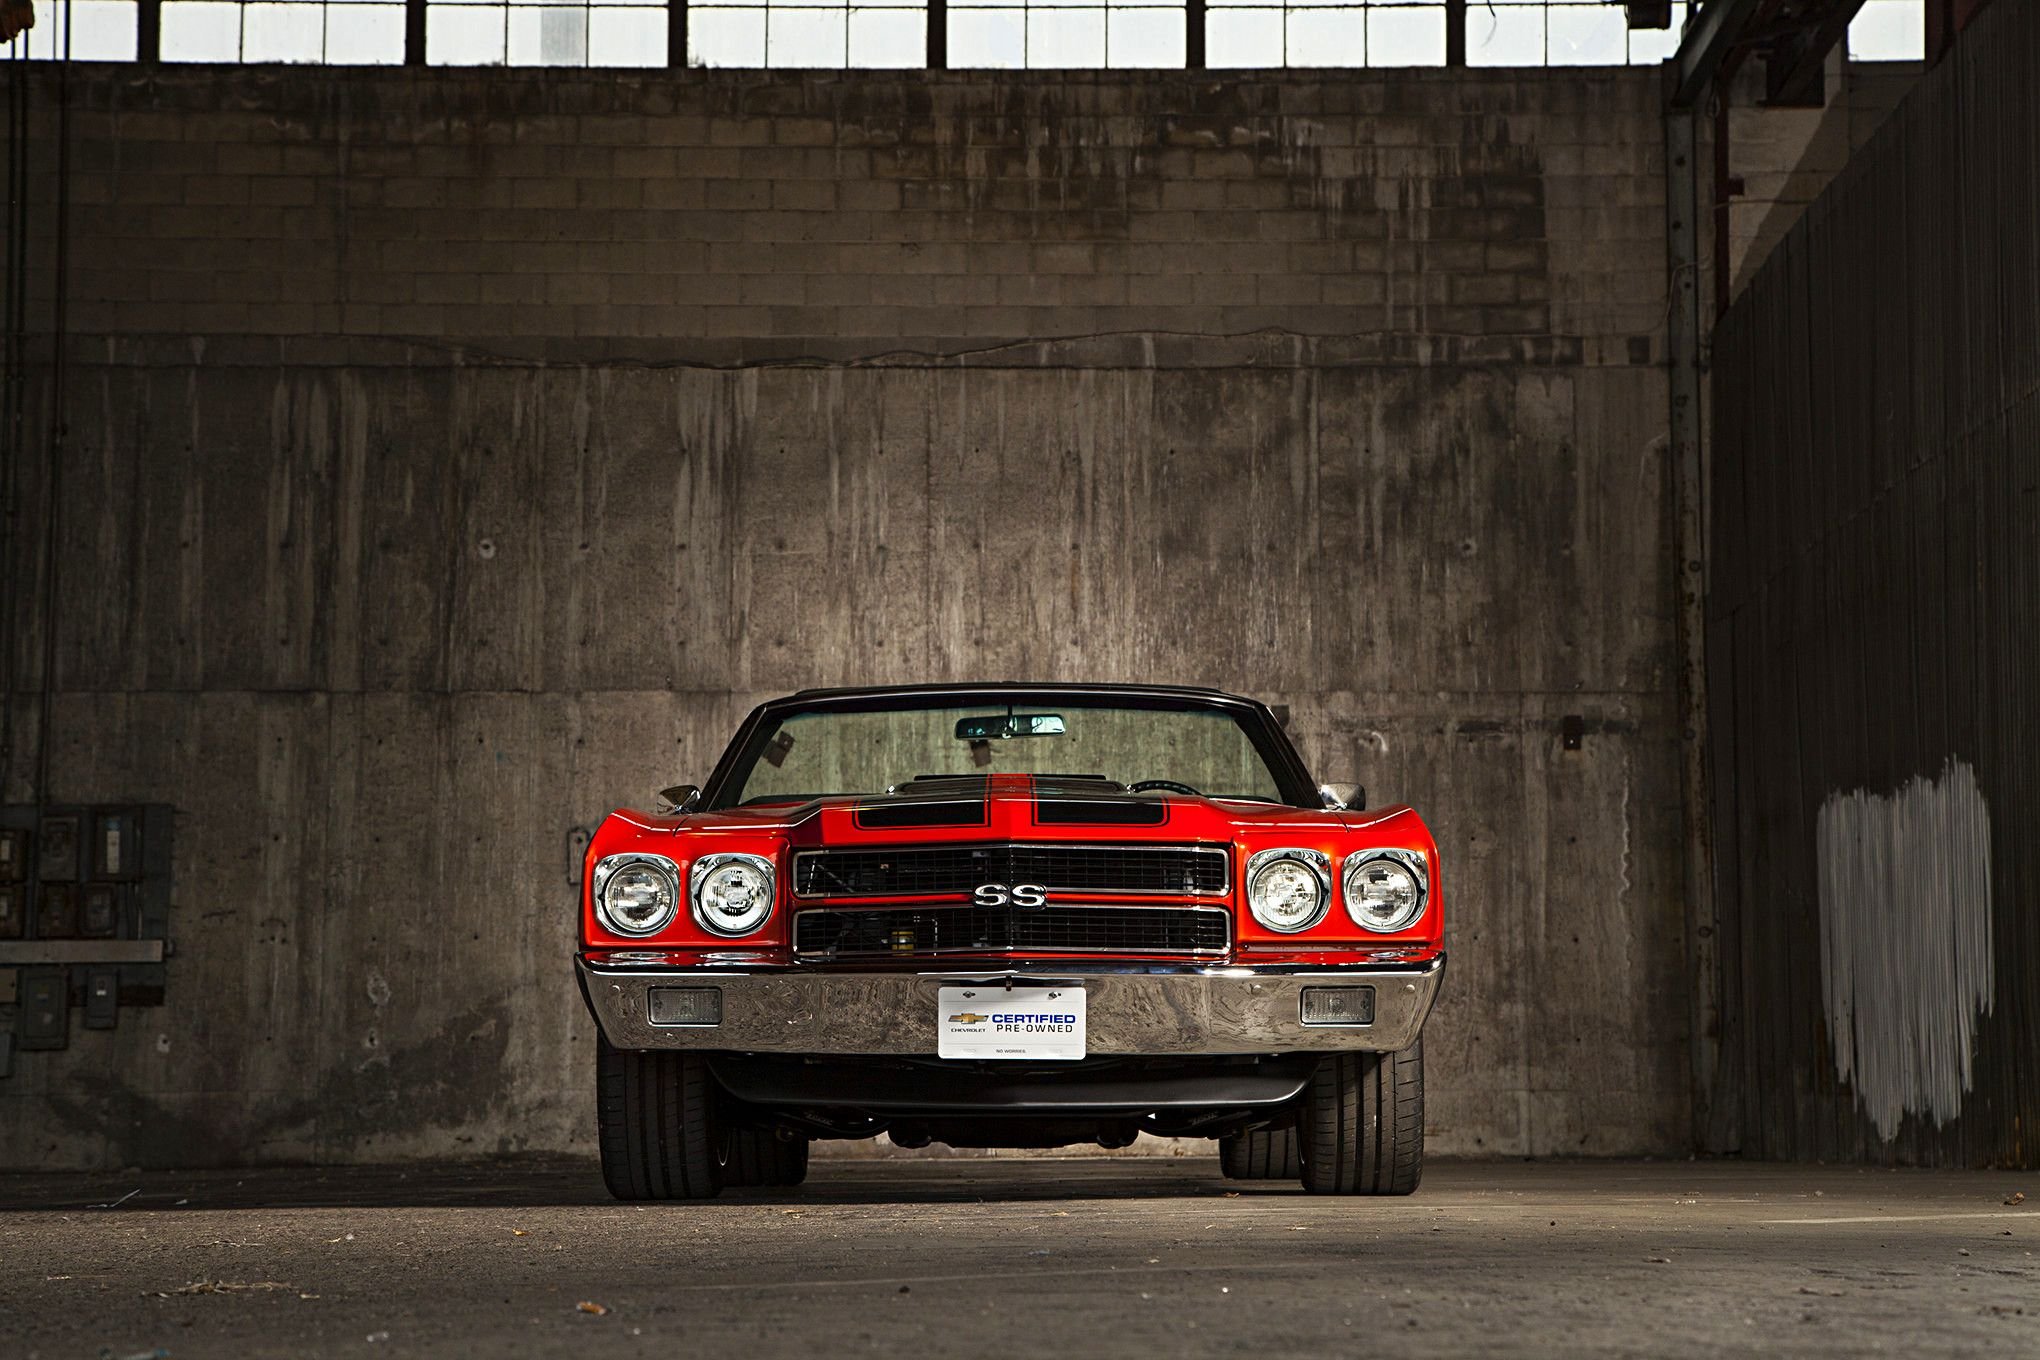 ls3, Powered, 1970, Chevelle, S s, Muscle, Classic, Hot, Rod, Rods, Hotrod, Custom, Chevy, Chevrolet Wallpaper